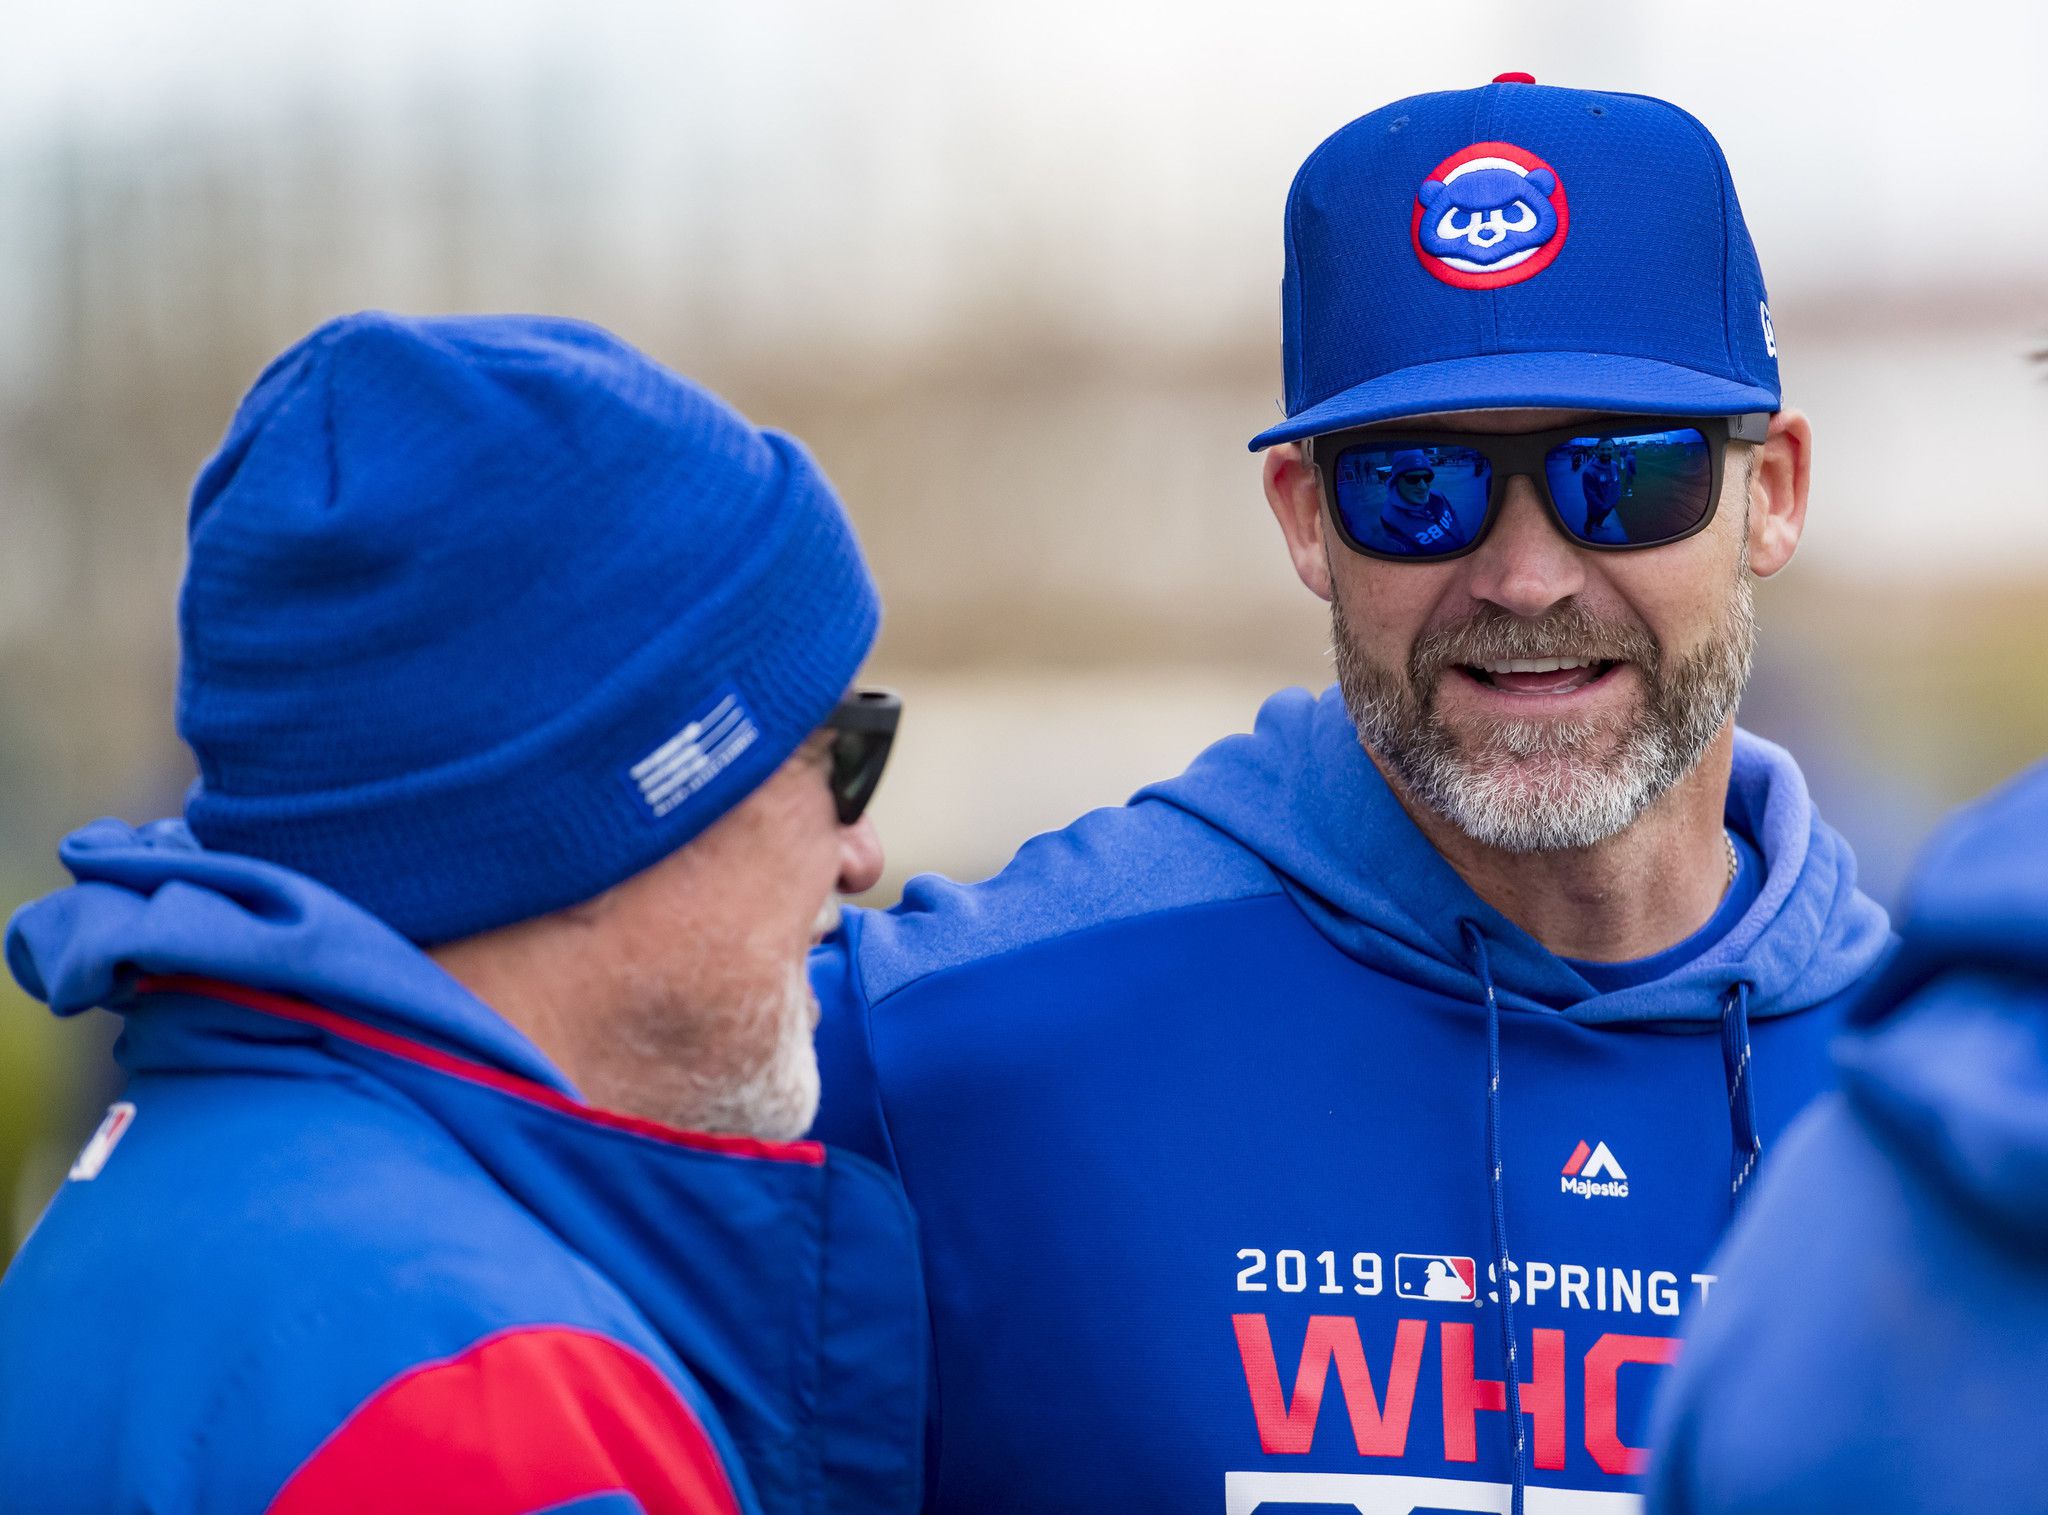 David Ross is joining ESPN as an analyst